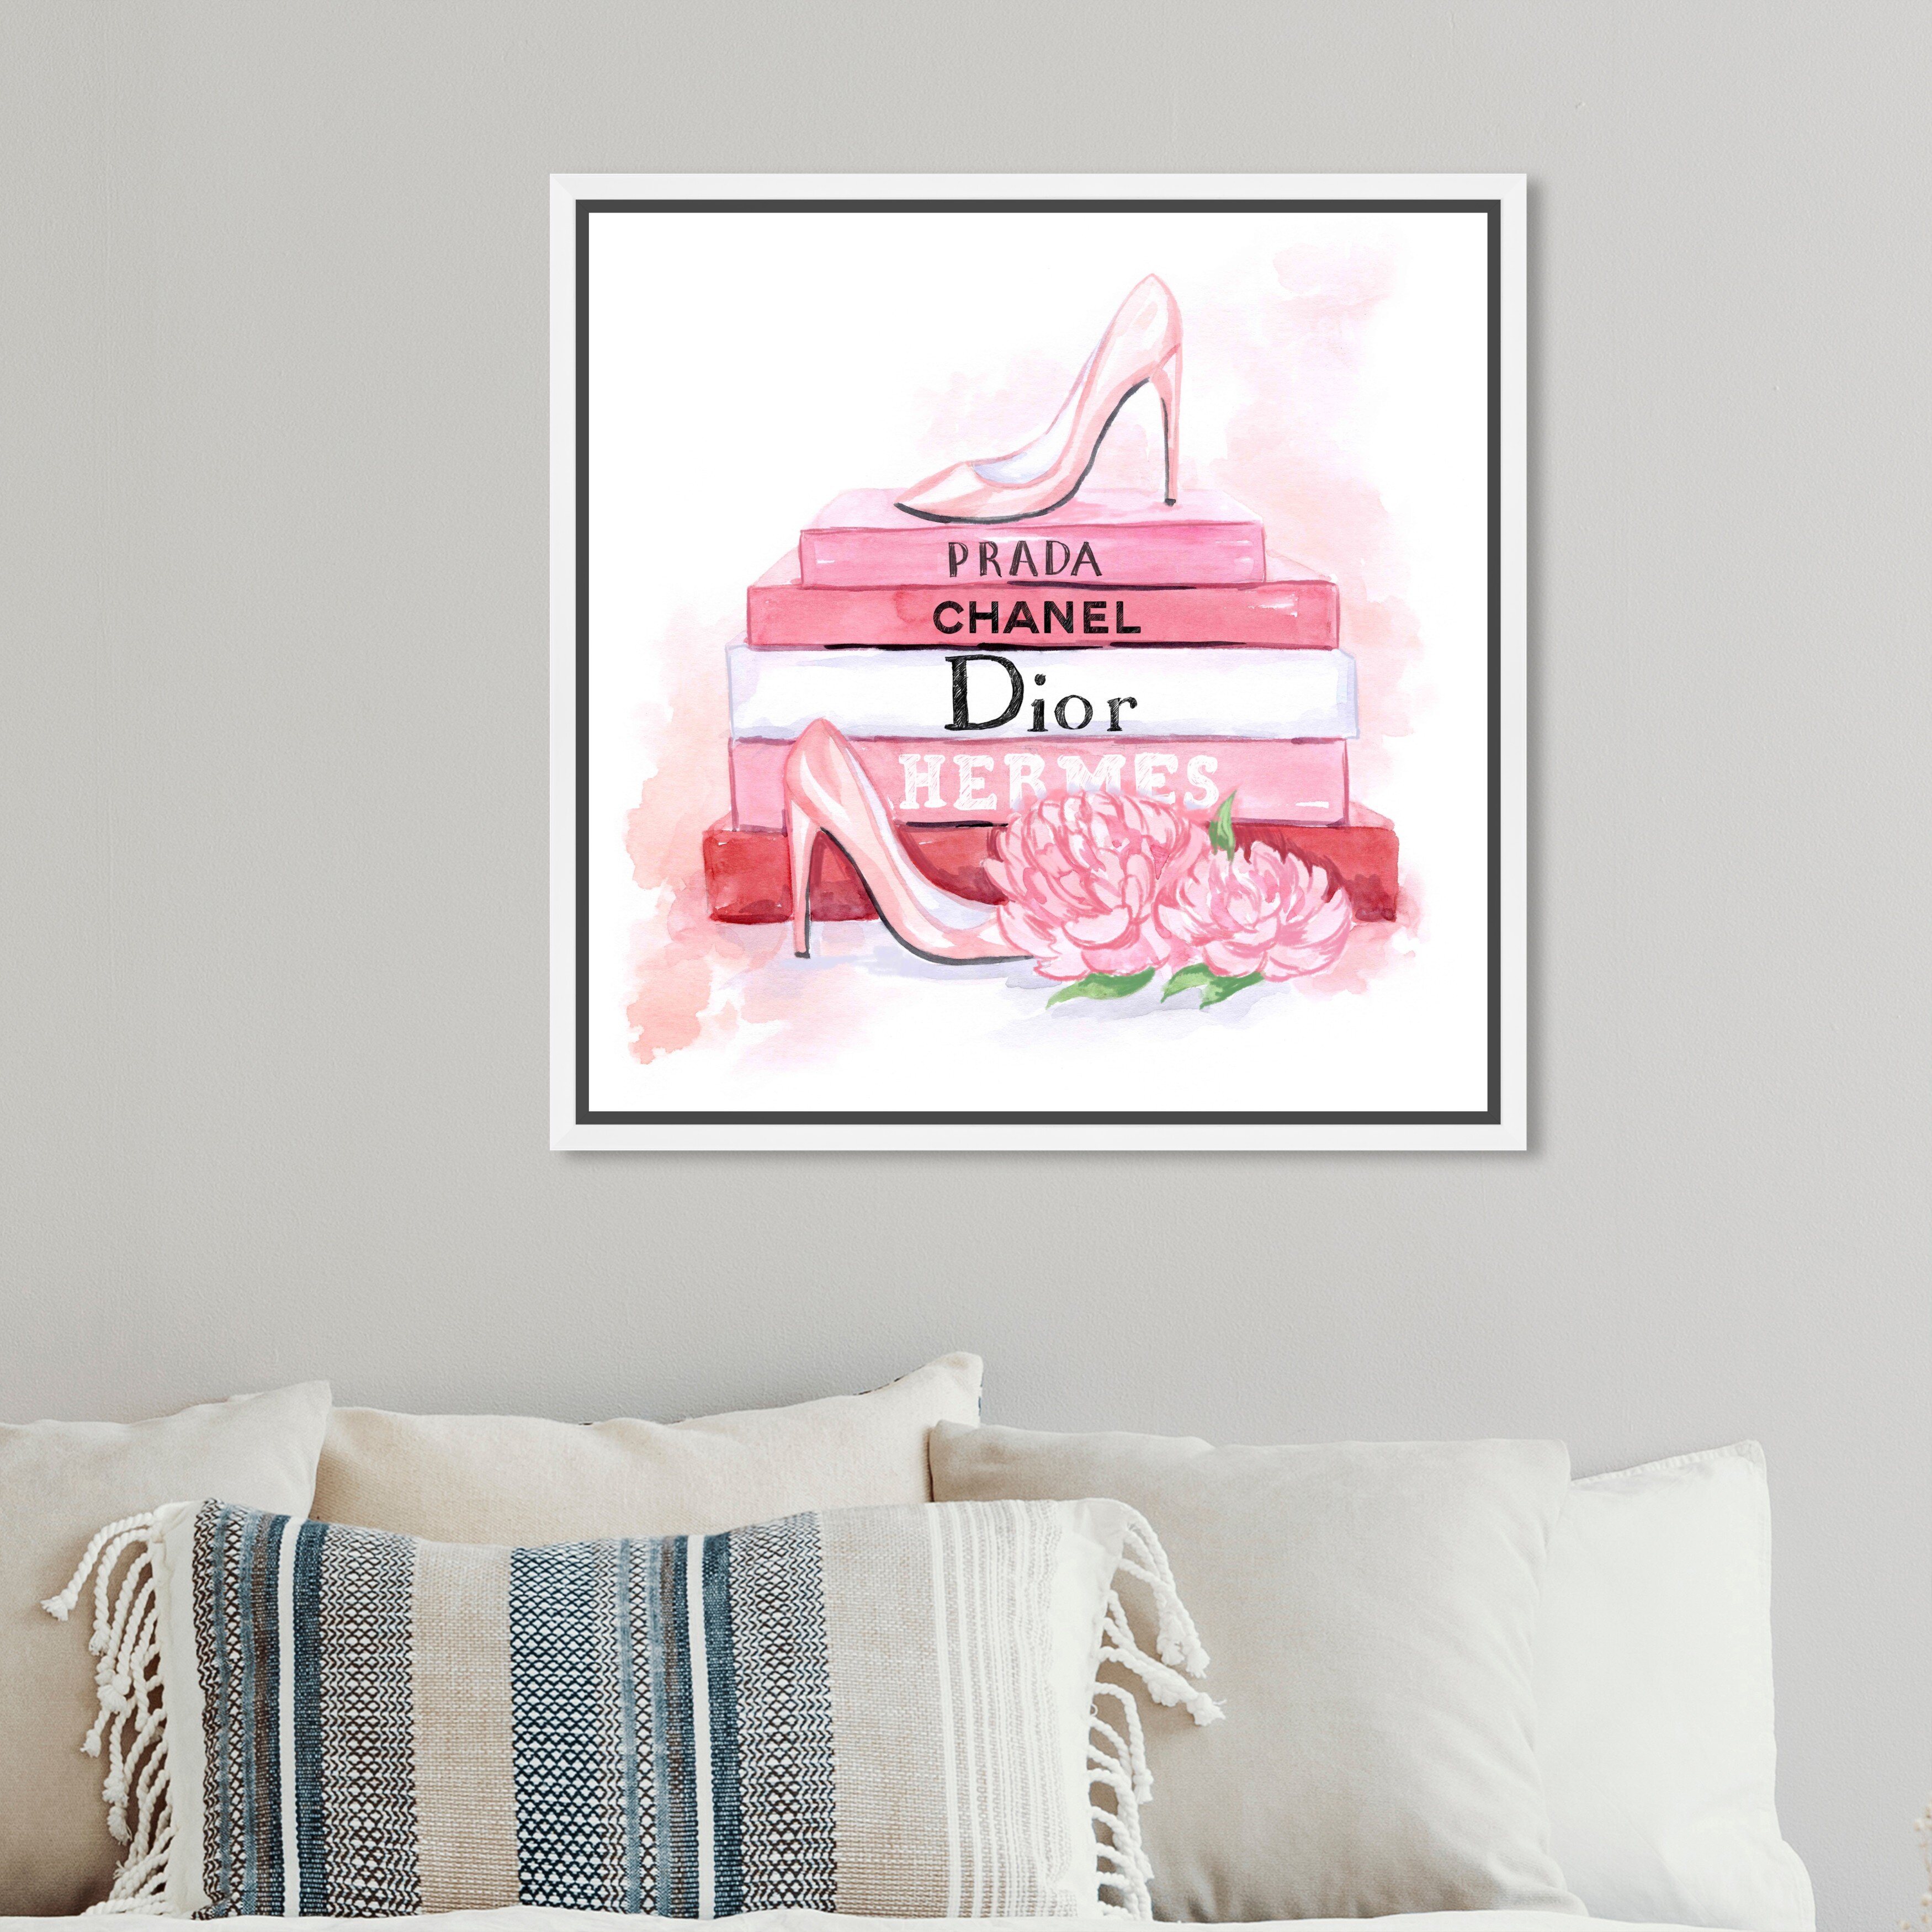 Oliver Gal 'Fashion Pink Books' Fashion and Glam Wall Art Canvas Print - Pink, White - 12 x 12